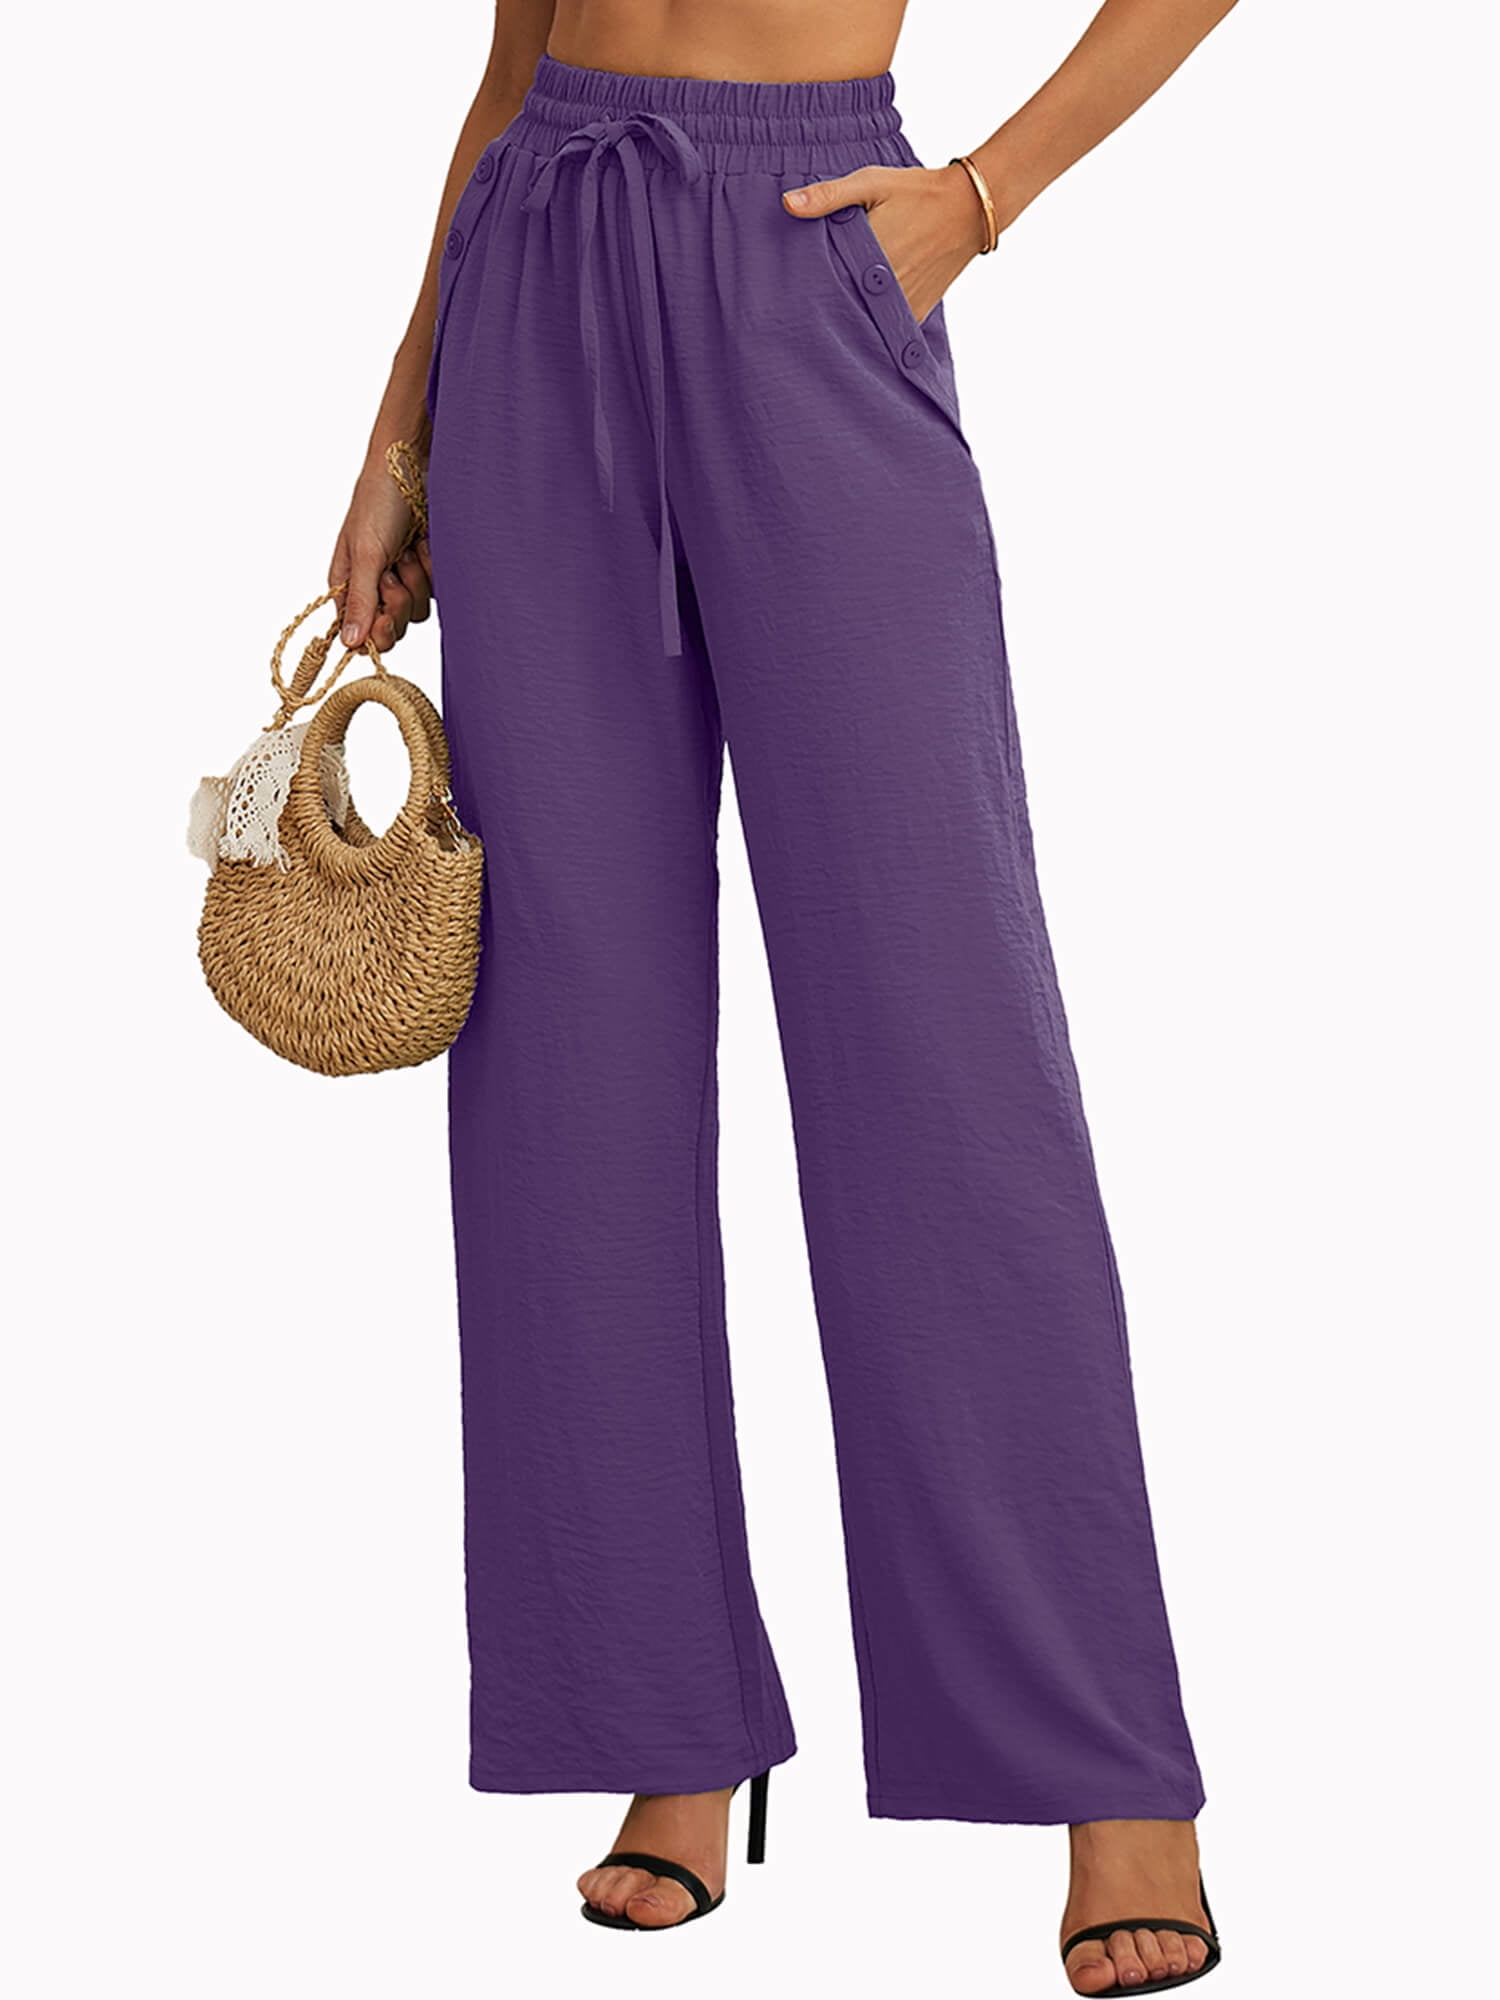 SHOWMALL Women's Pants High Waisted Pants Purple L Casual Loose ...